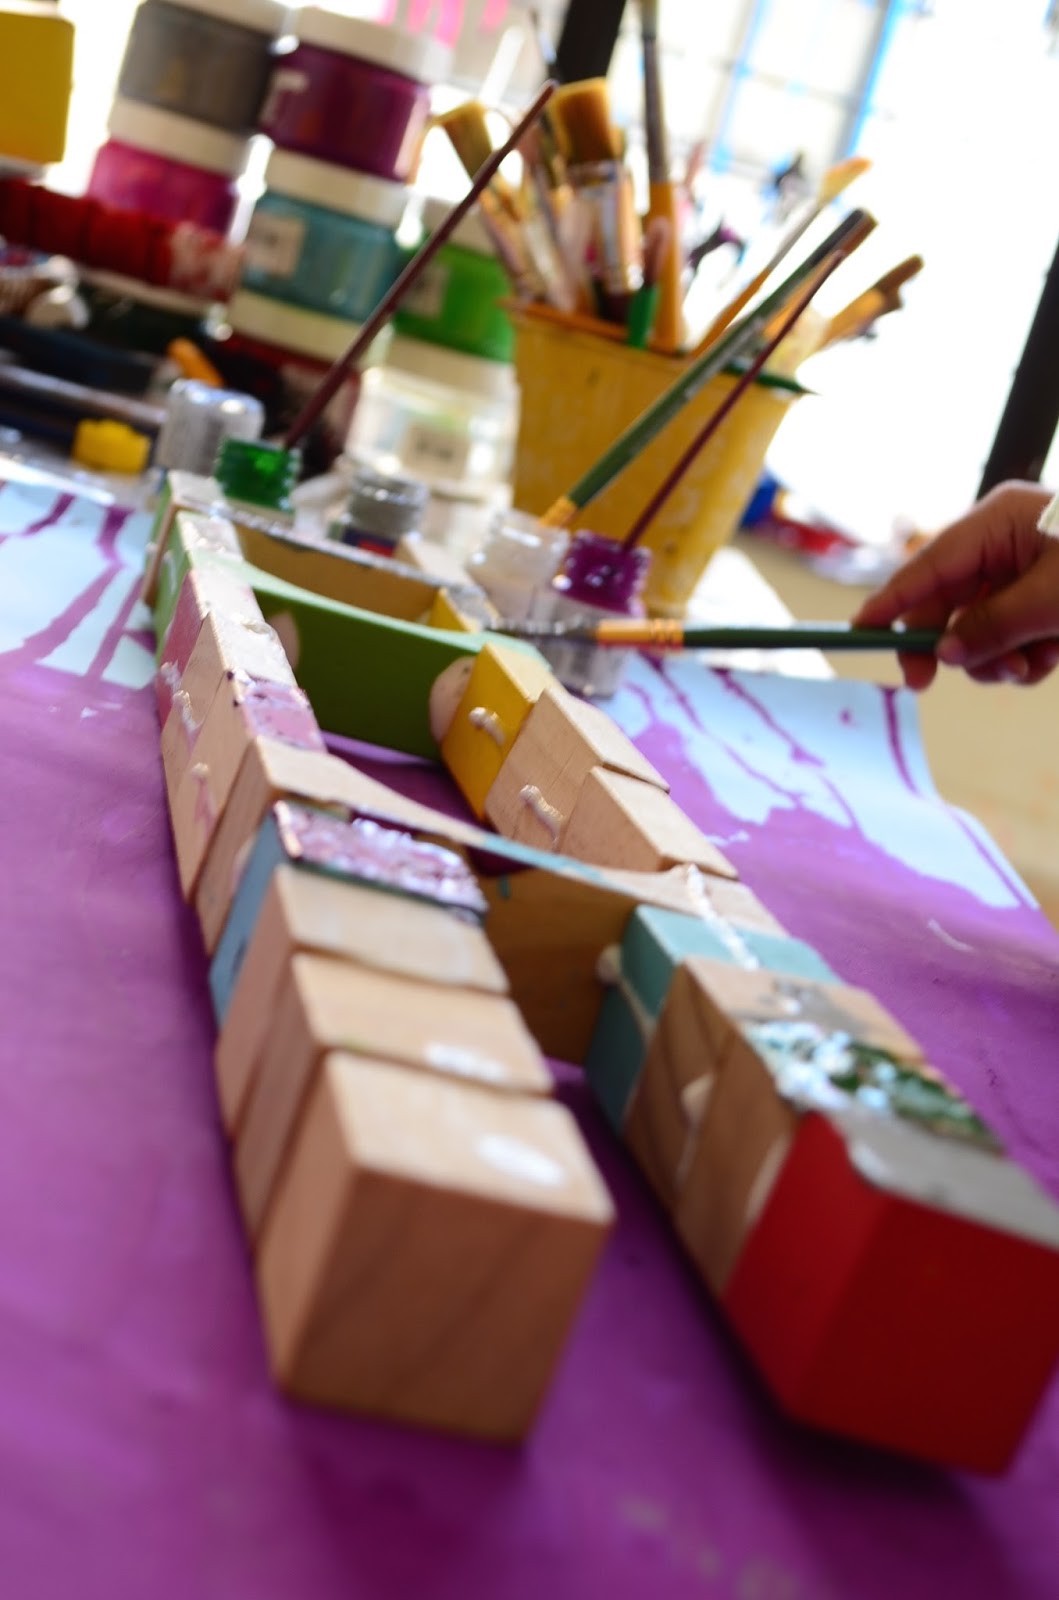 The Practical Mom: Block Play for Kids who love Art 